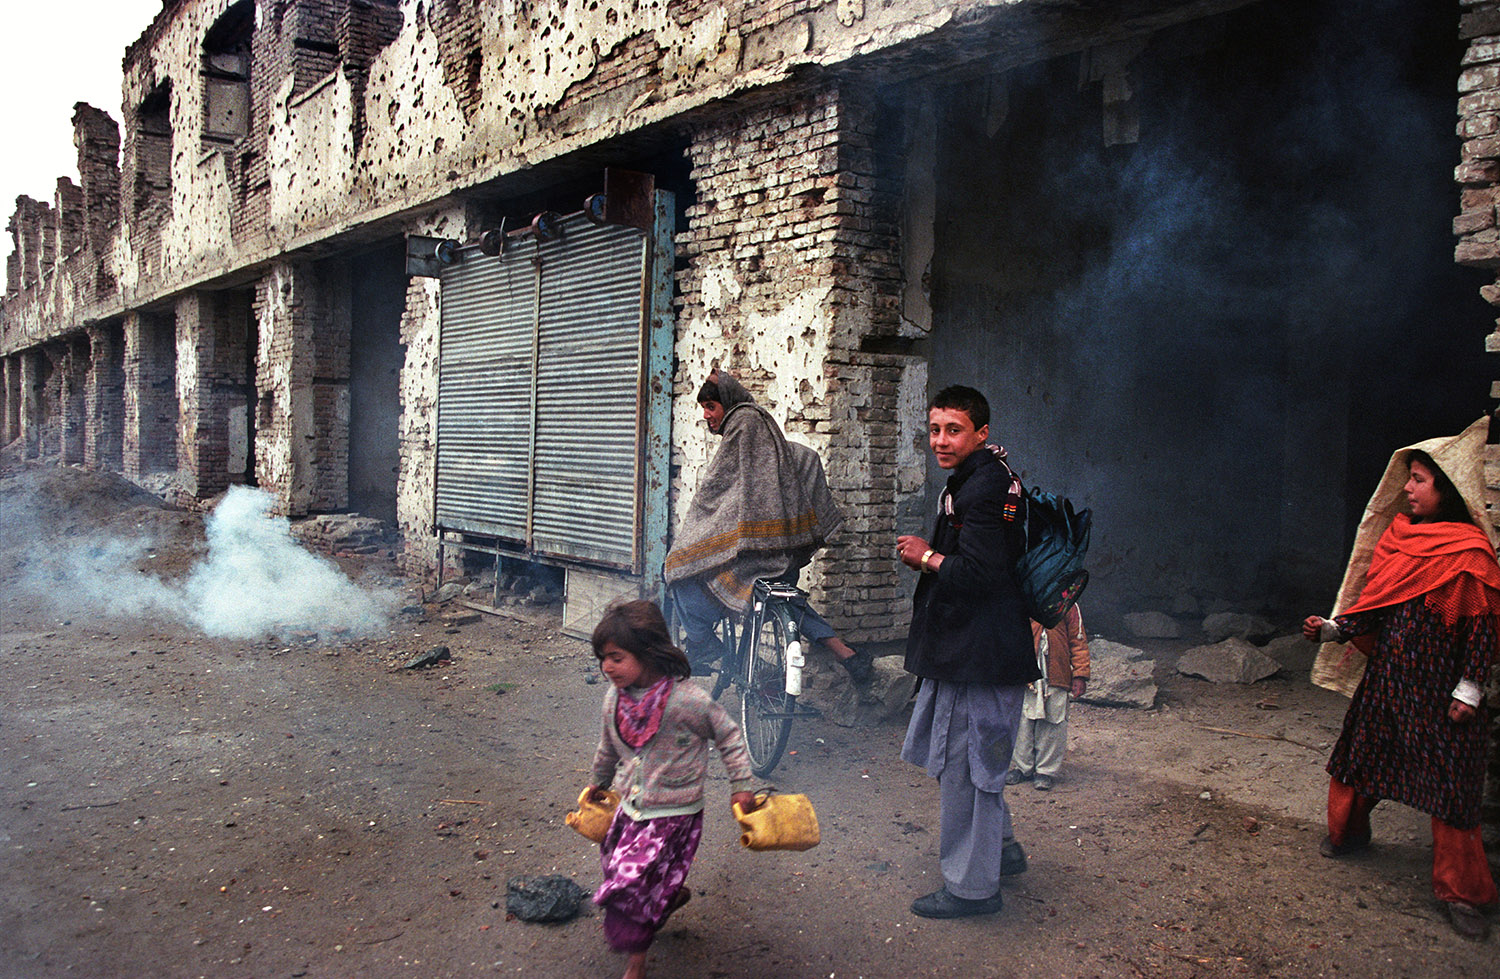 Children In the streets of Kabul.